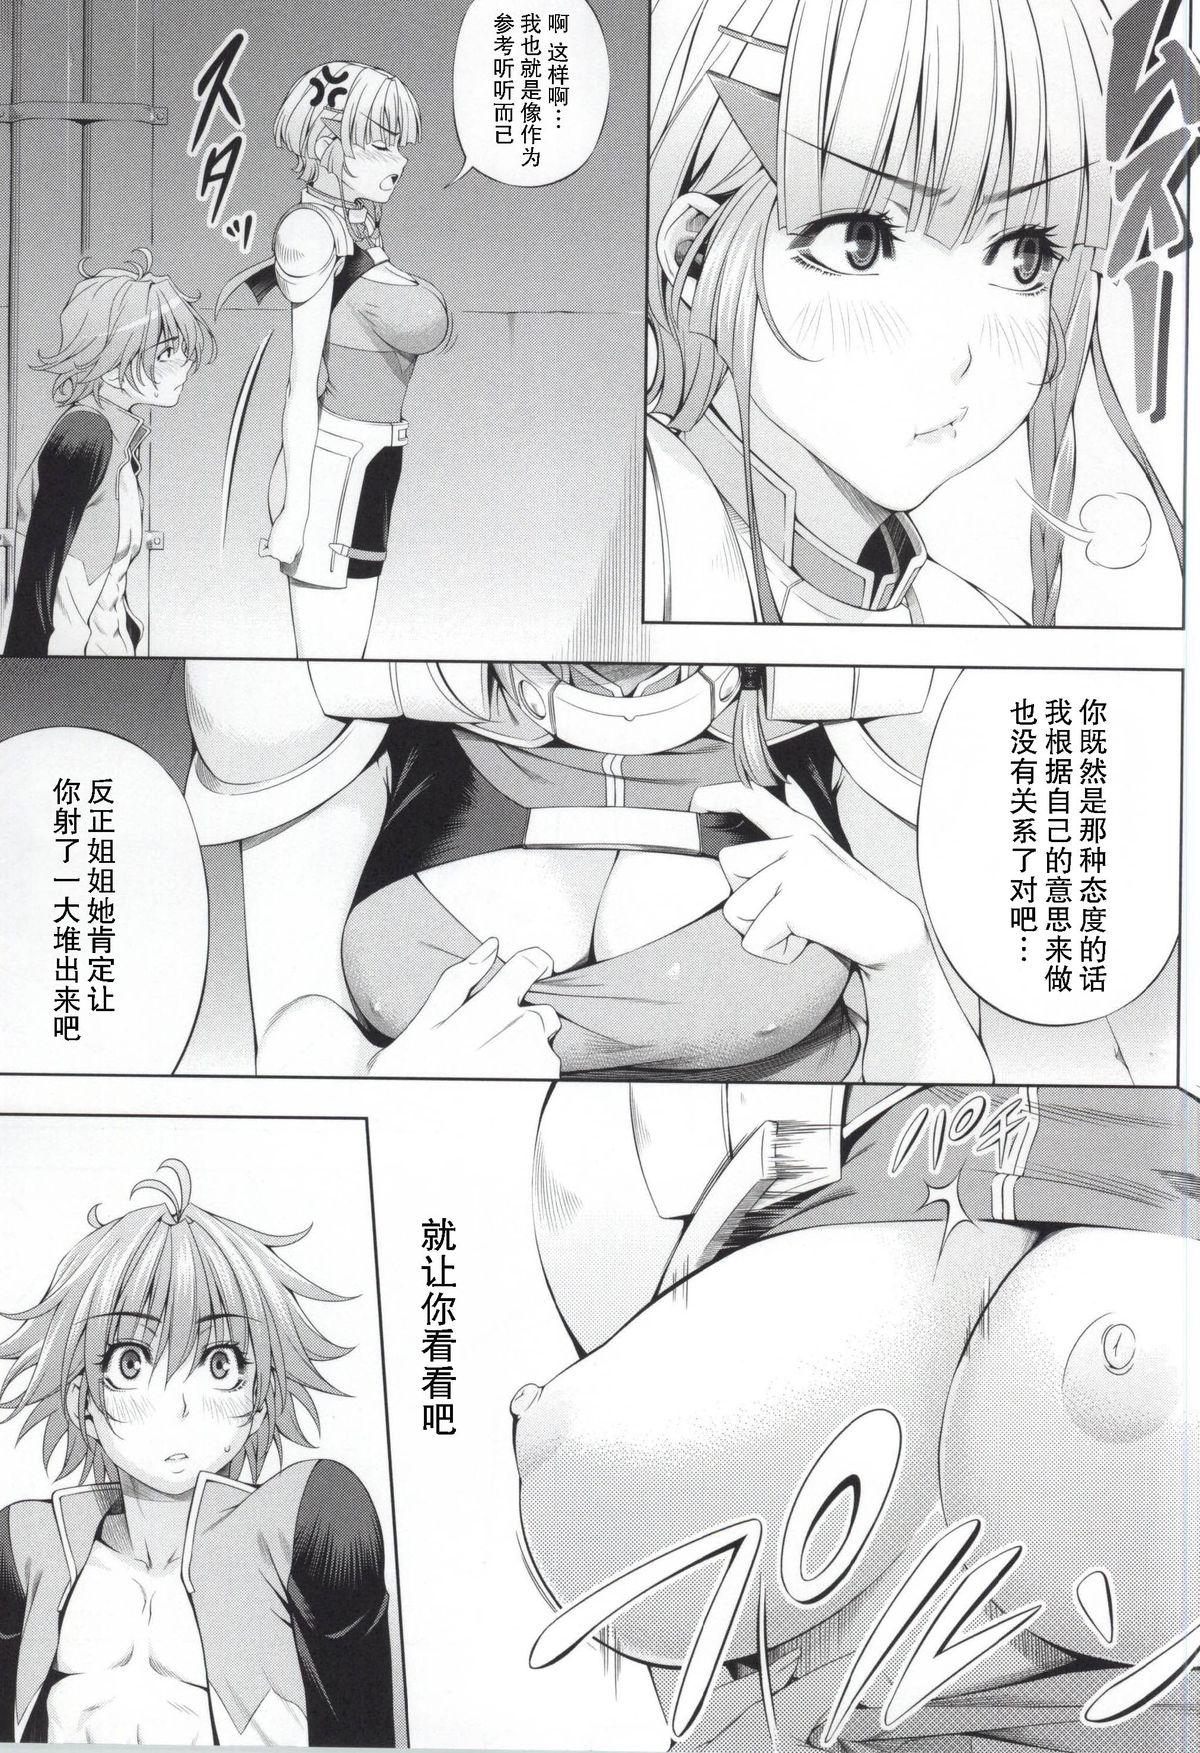 Cam Girl Seolla of book - Super robot wars Polla - Page 6